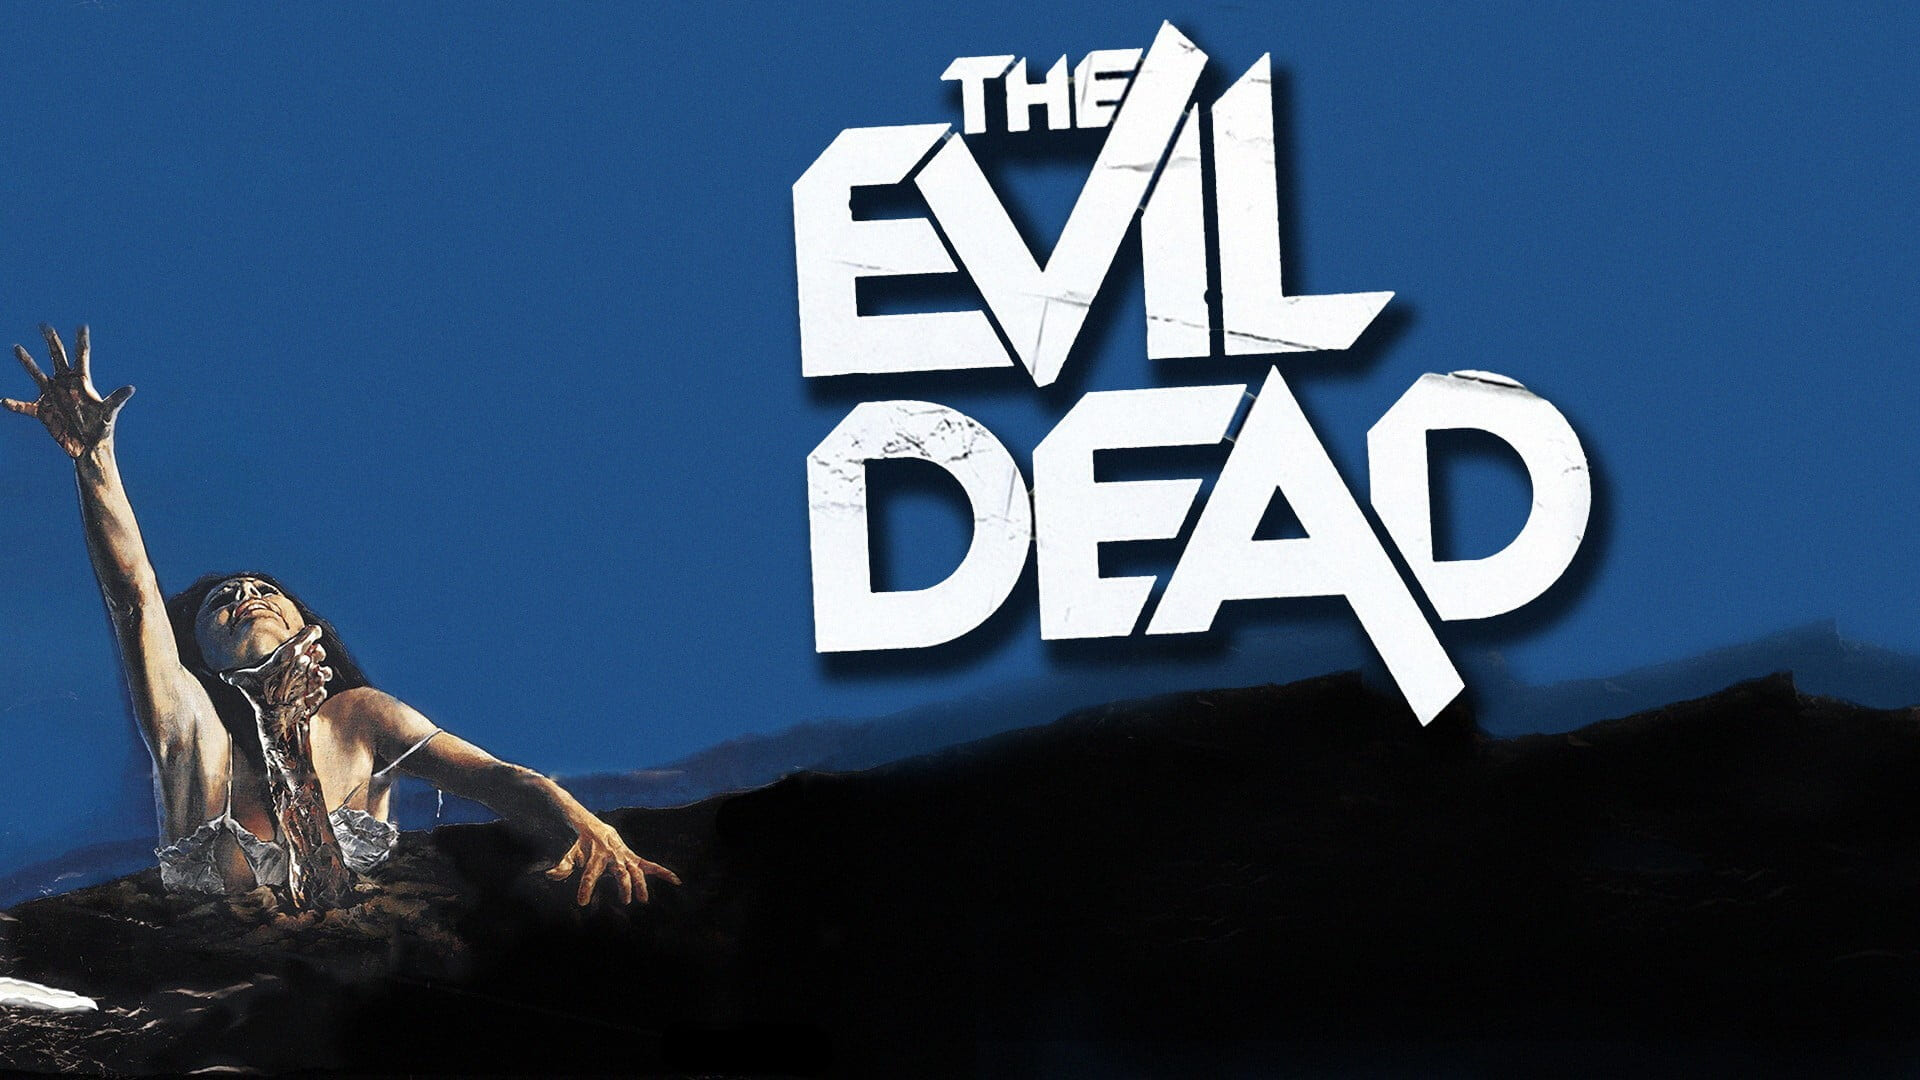 Evil Dead: The Game: Interview With A Passionate Team - DREAD XP